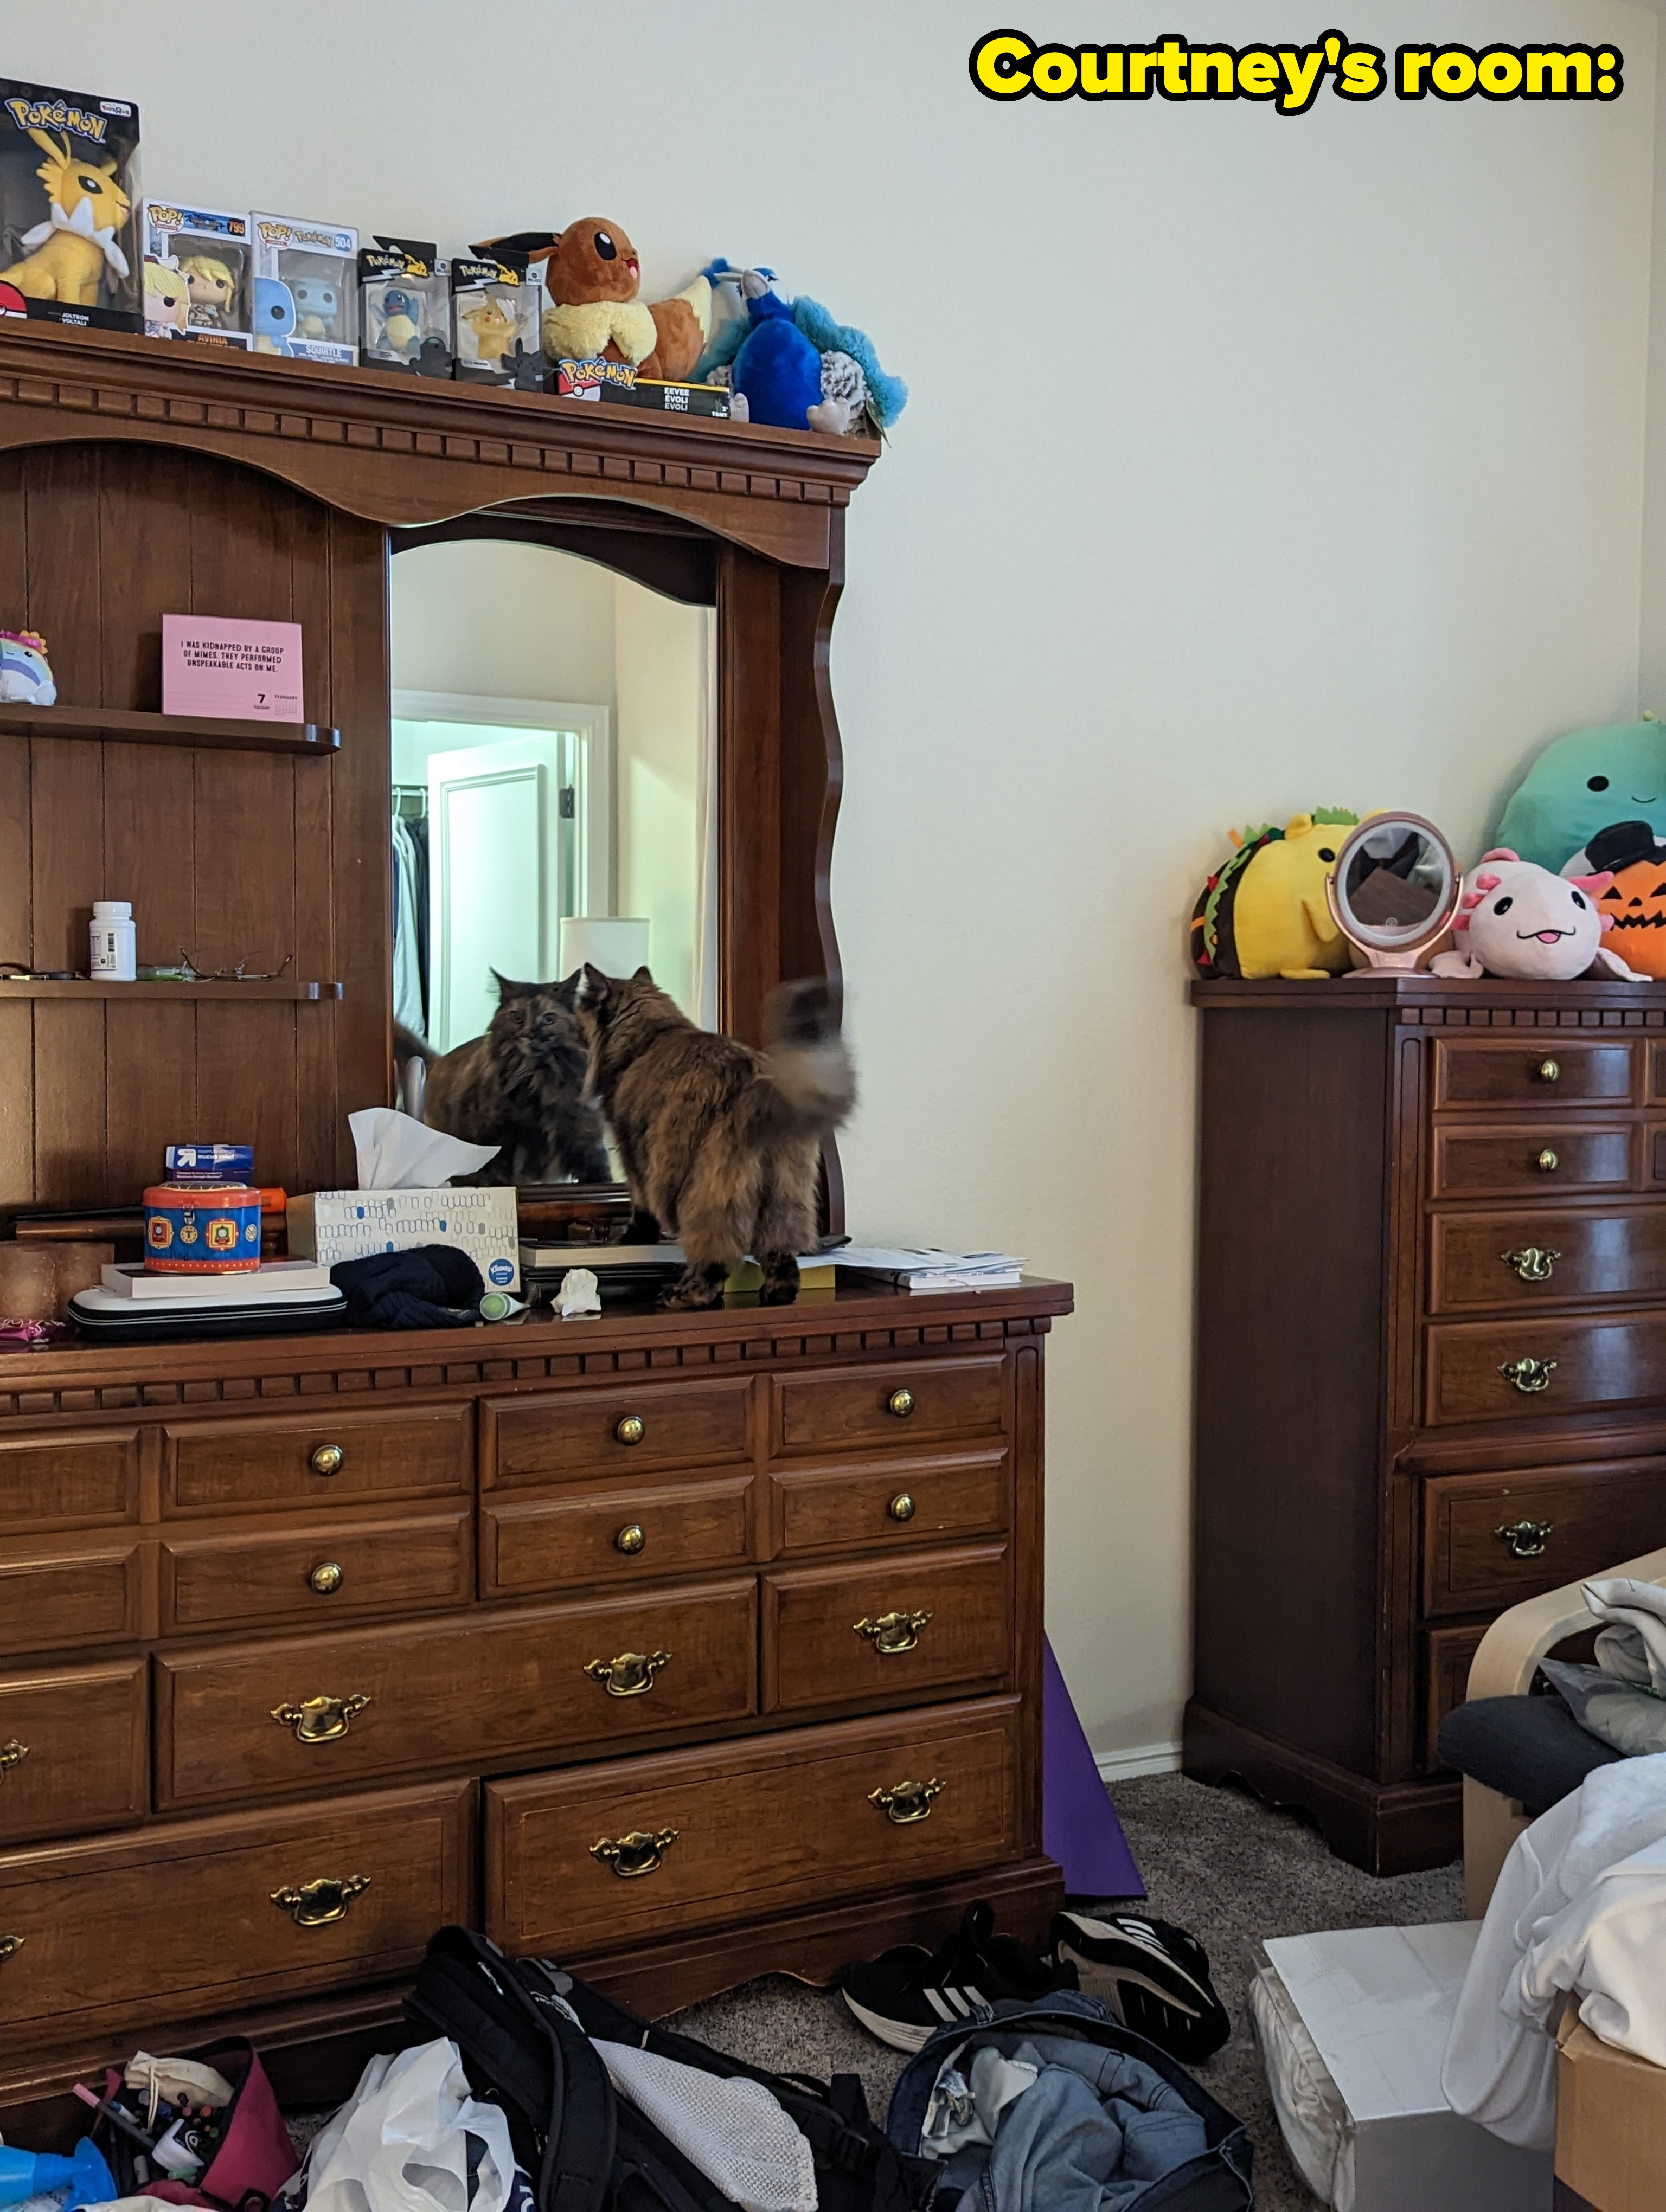 Long-haired cat on a dresser with plush toys on shelves and scattered items around the room